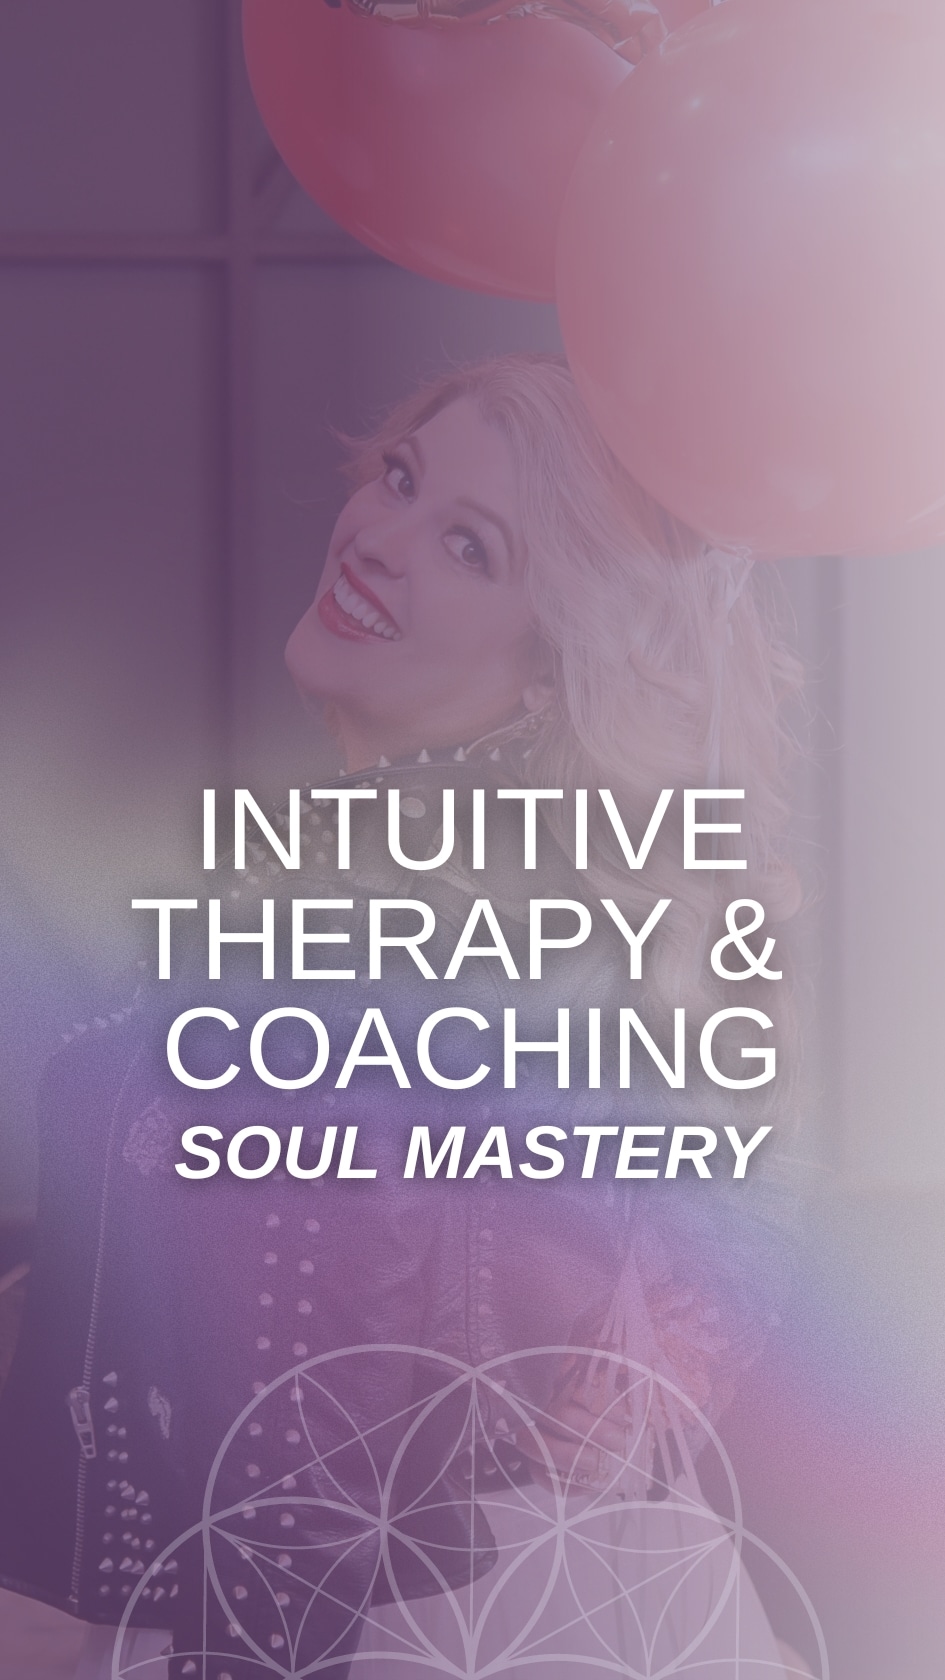 Soul Mastery Intuitive Therapy & Coaching with Lindsay Goodwin and Garnet Moon.